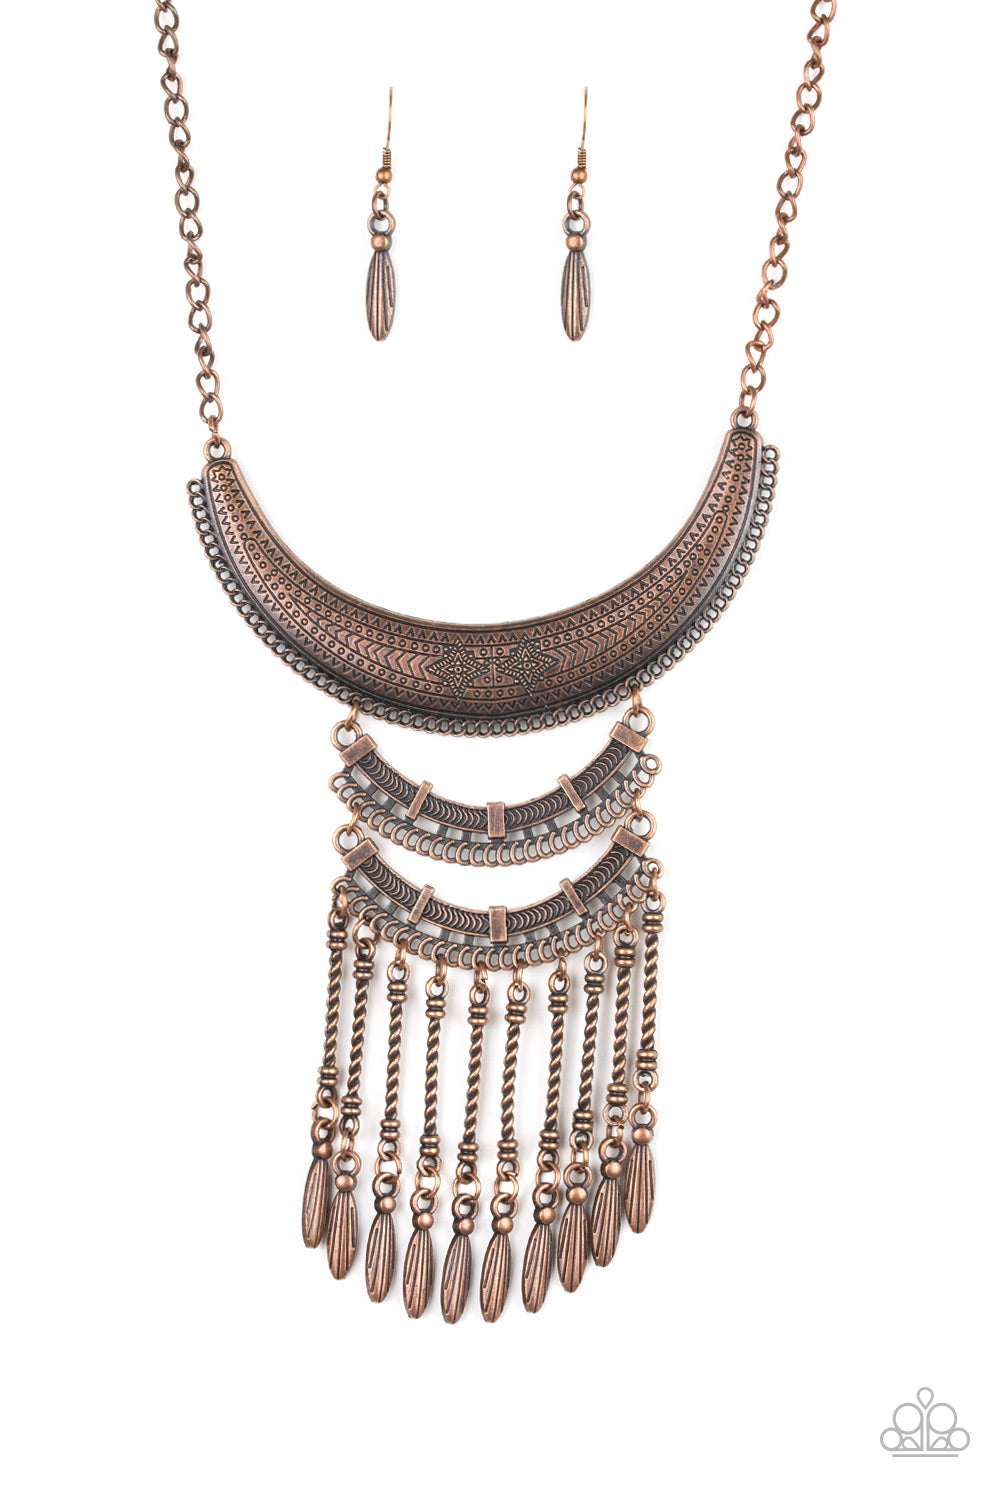 Eastern Empress Copper Necklace - Paparazzi Accessories - Stamped and embossed in tribal inspired patterns, three copper plates connect down the chest, creating a fiercely stacked pendant. Attached to twisted copper rods, ornate copper beads swing from the bottom of the lowermost plate, creating an eye-catching fringe. Features an adjustable clasp closure.